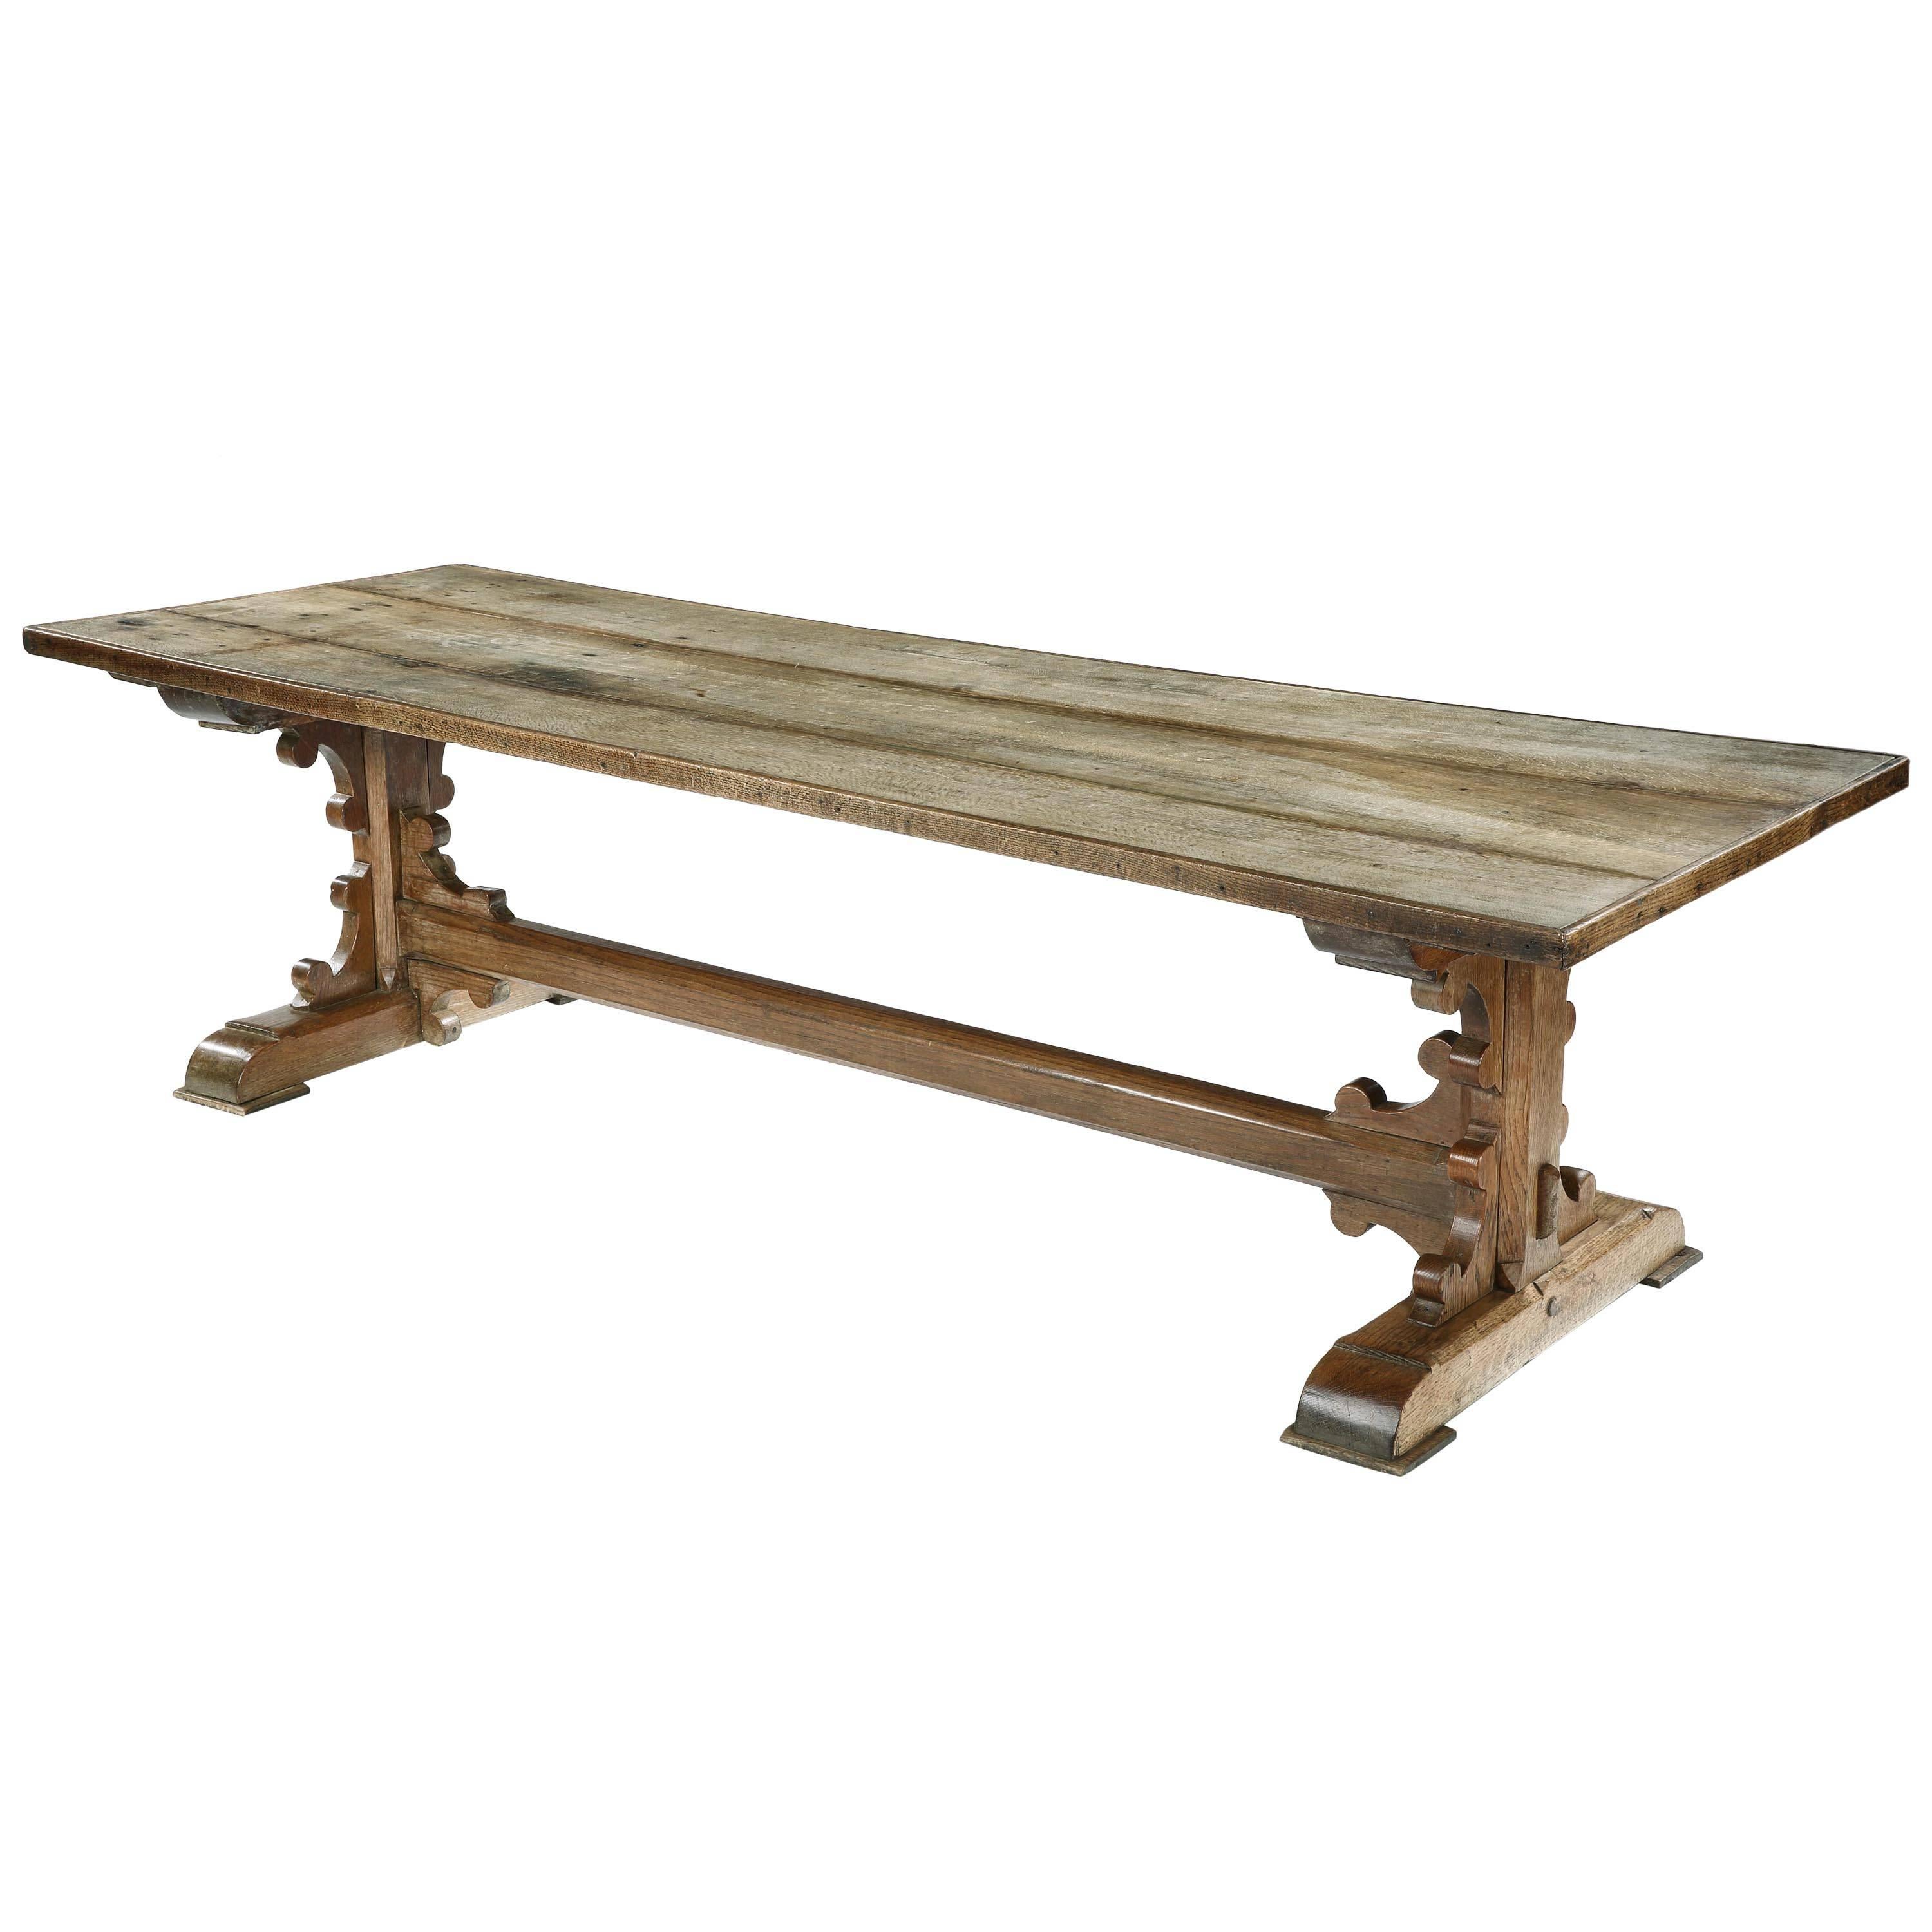 Gothic Revival Oak Refectory Table